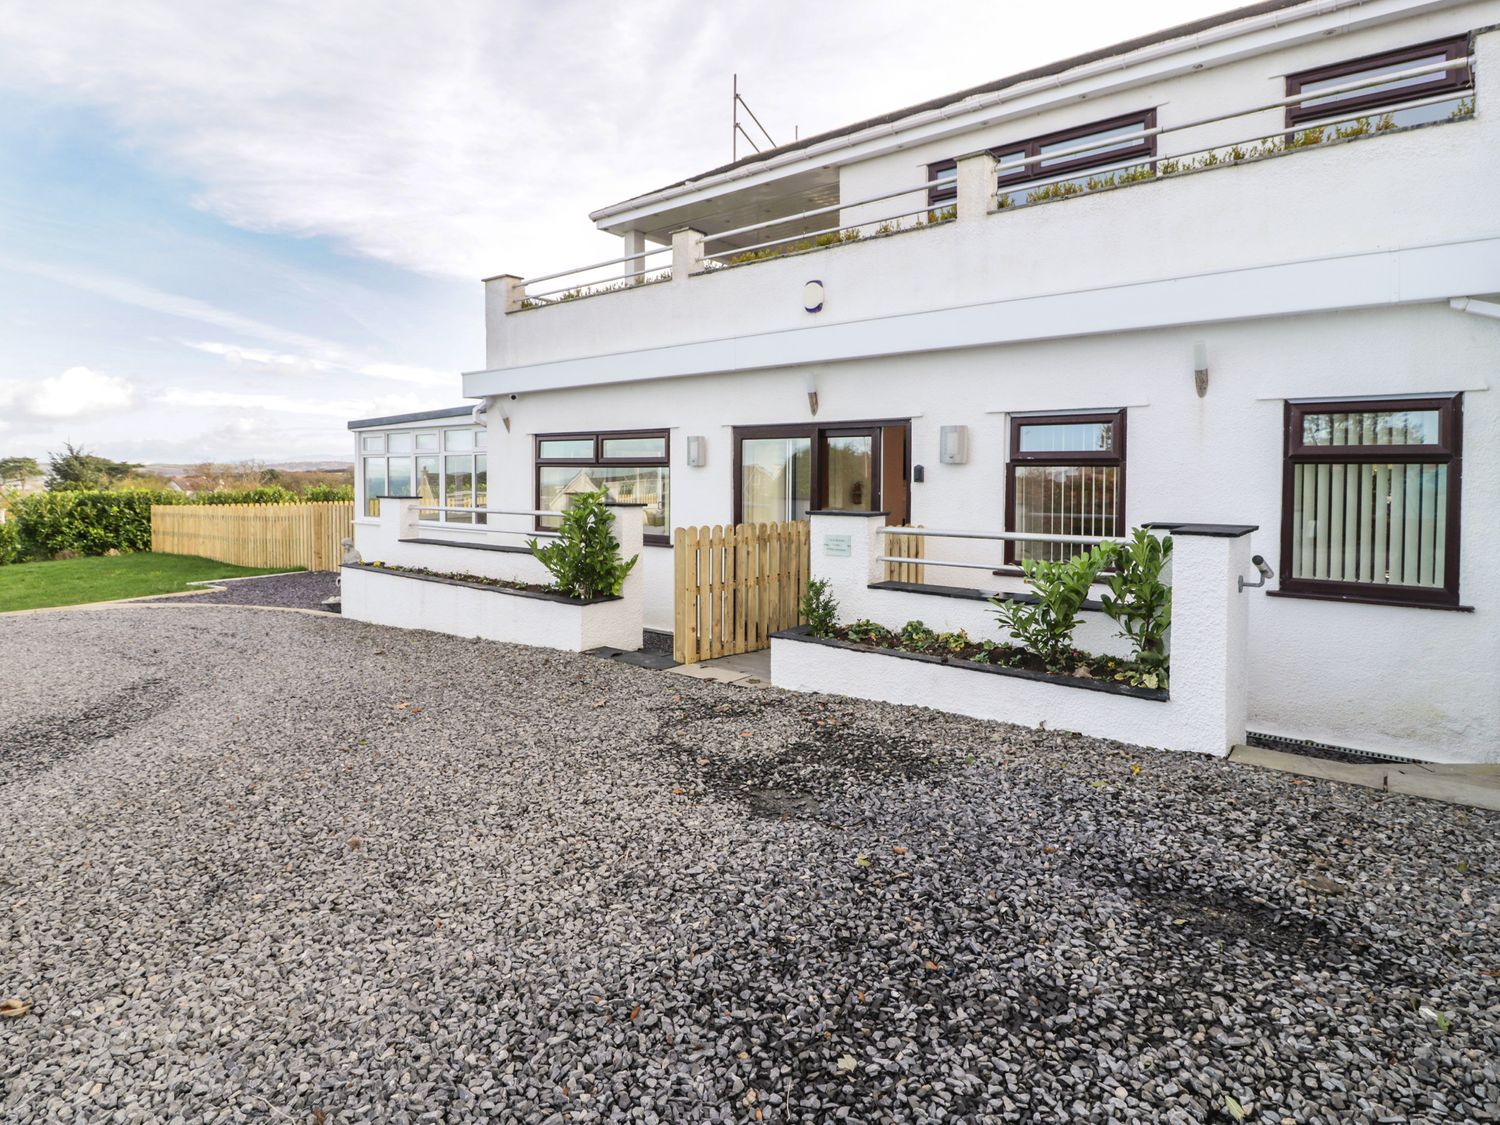 Top Of The Lane Luxury Holiday Apartment - Anglesey - 1115803 - photo 1